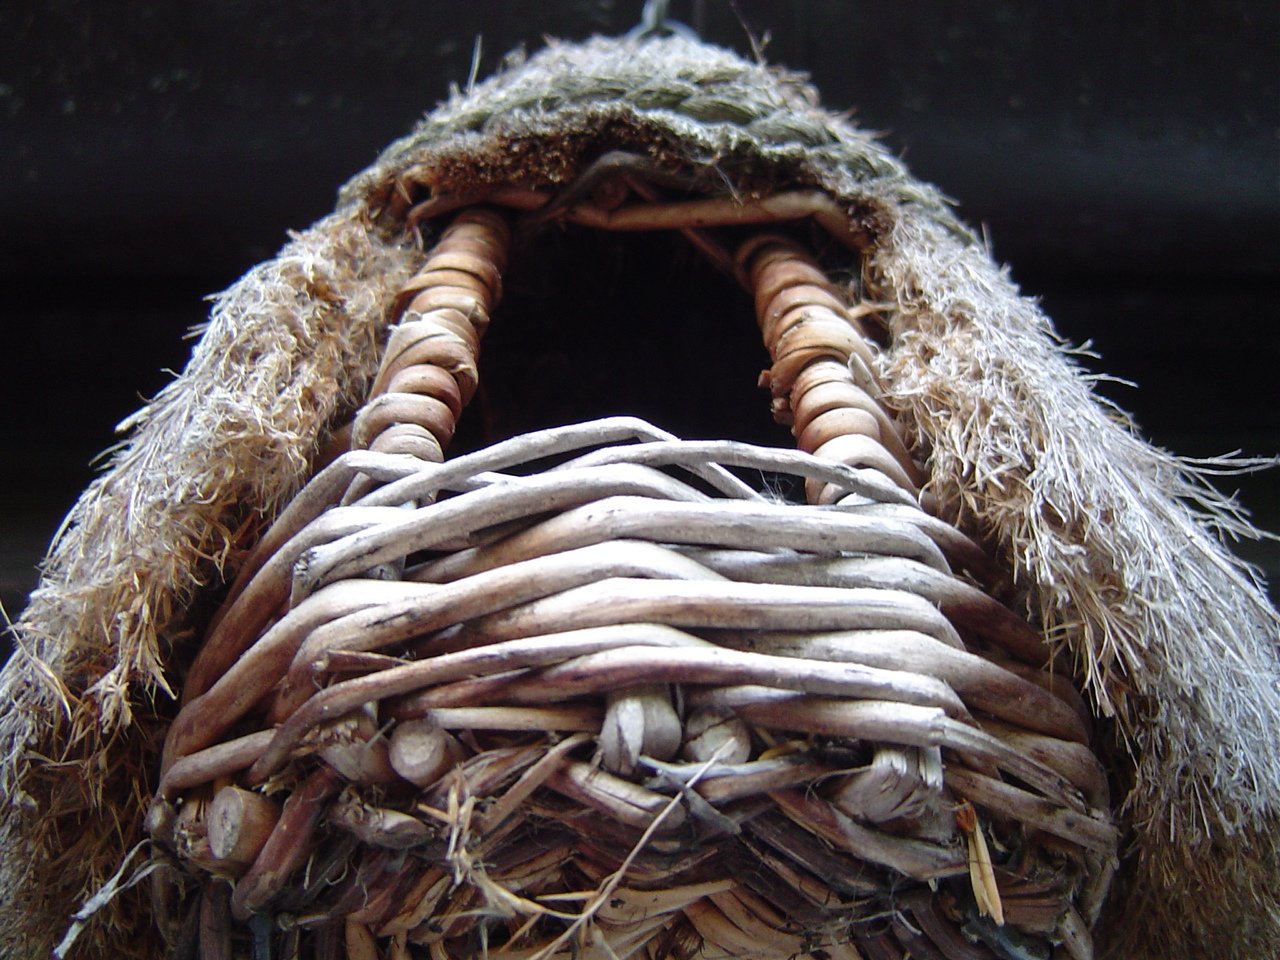 the nest is made out of twigs and other twigs